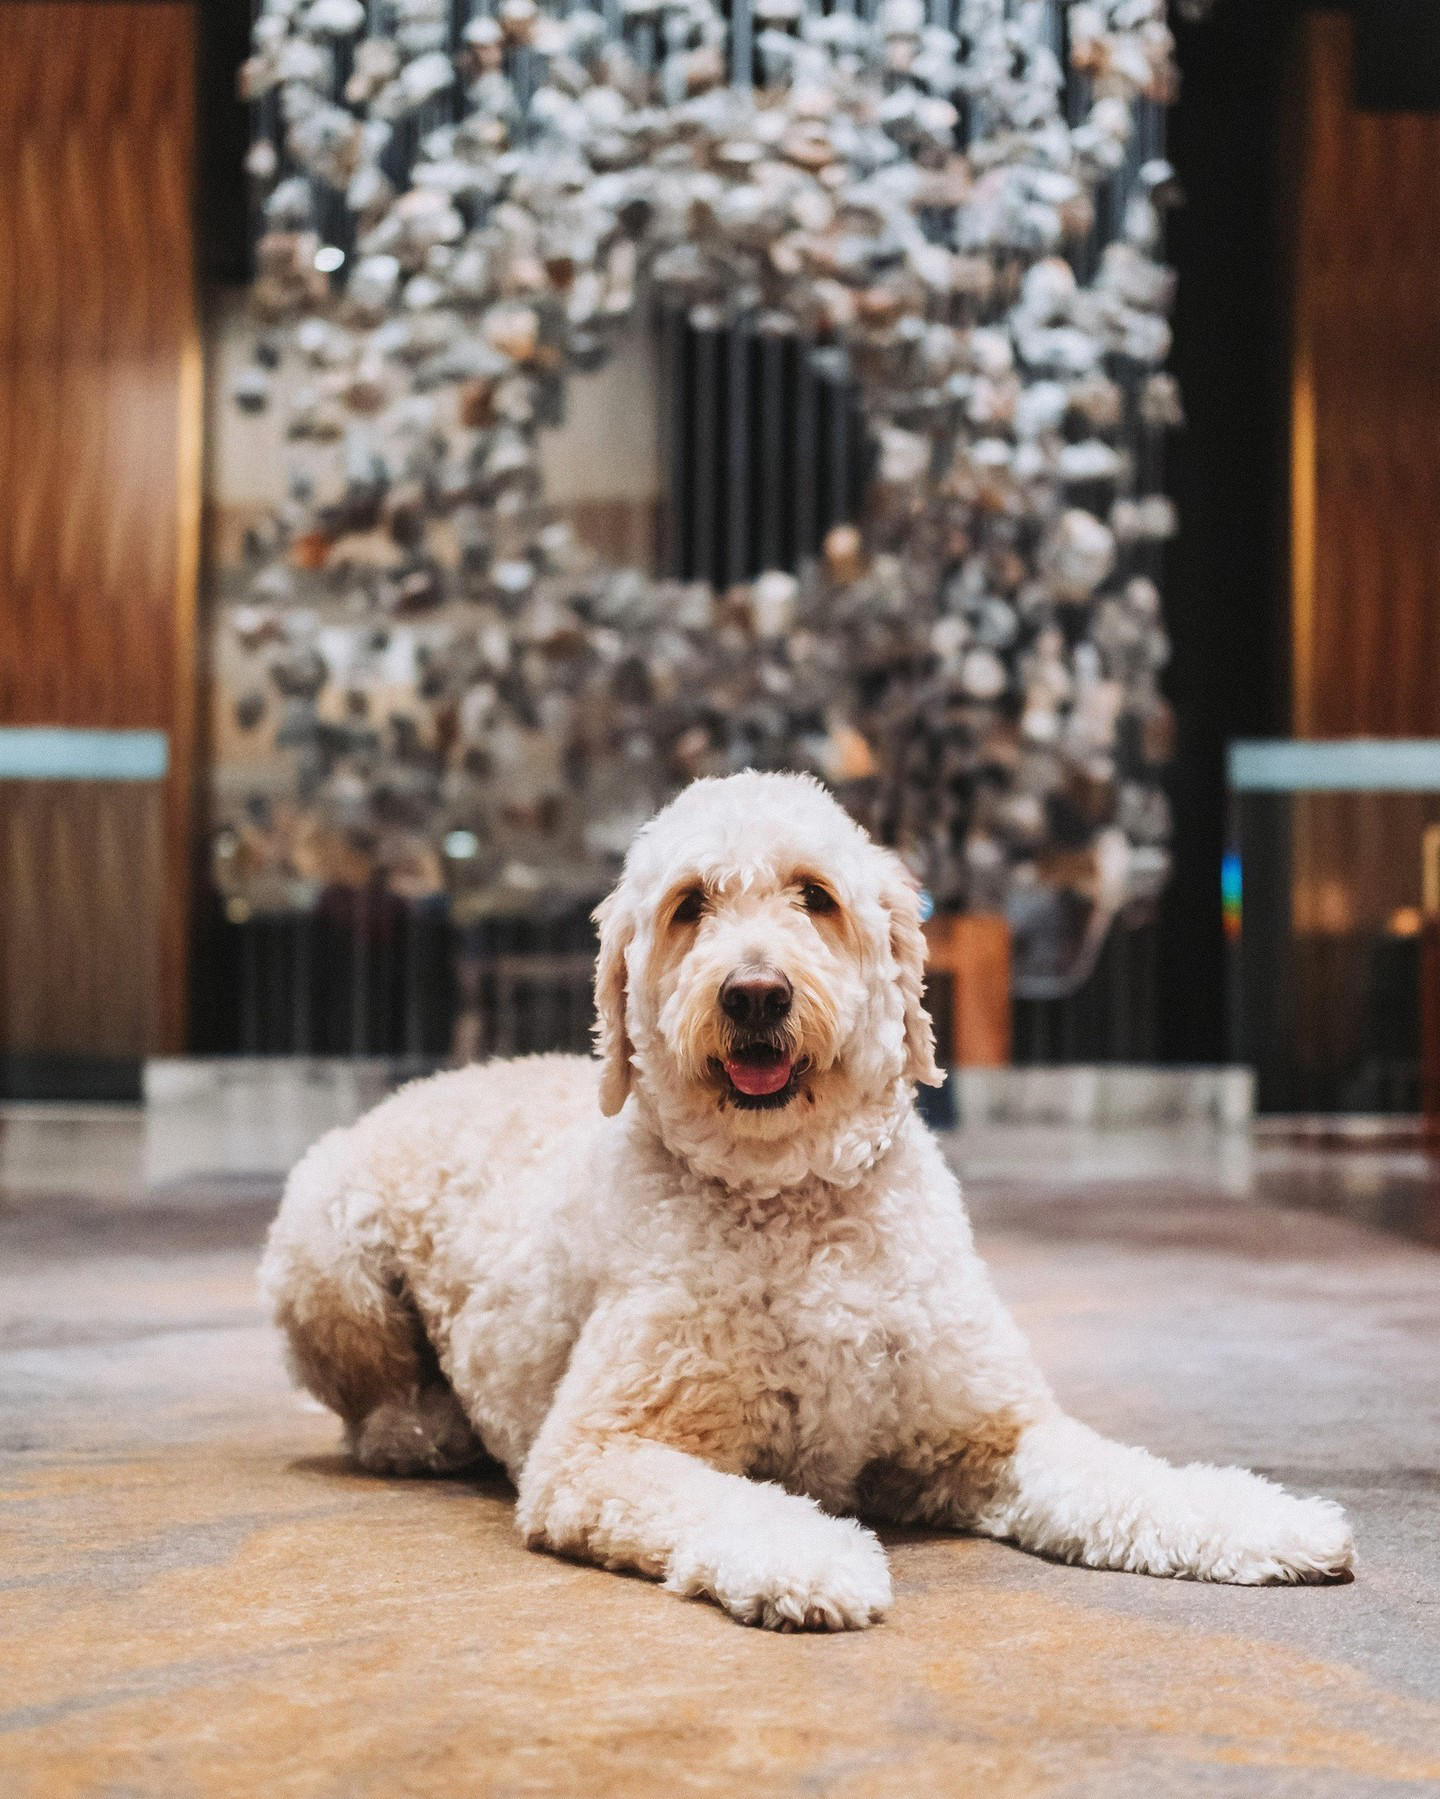 Delano Las Vegas - Treat yourself and your pup to a vacation